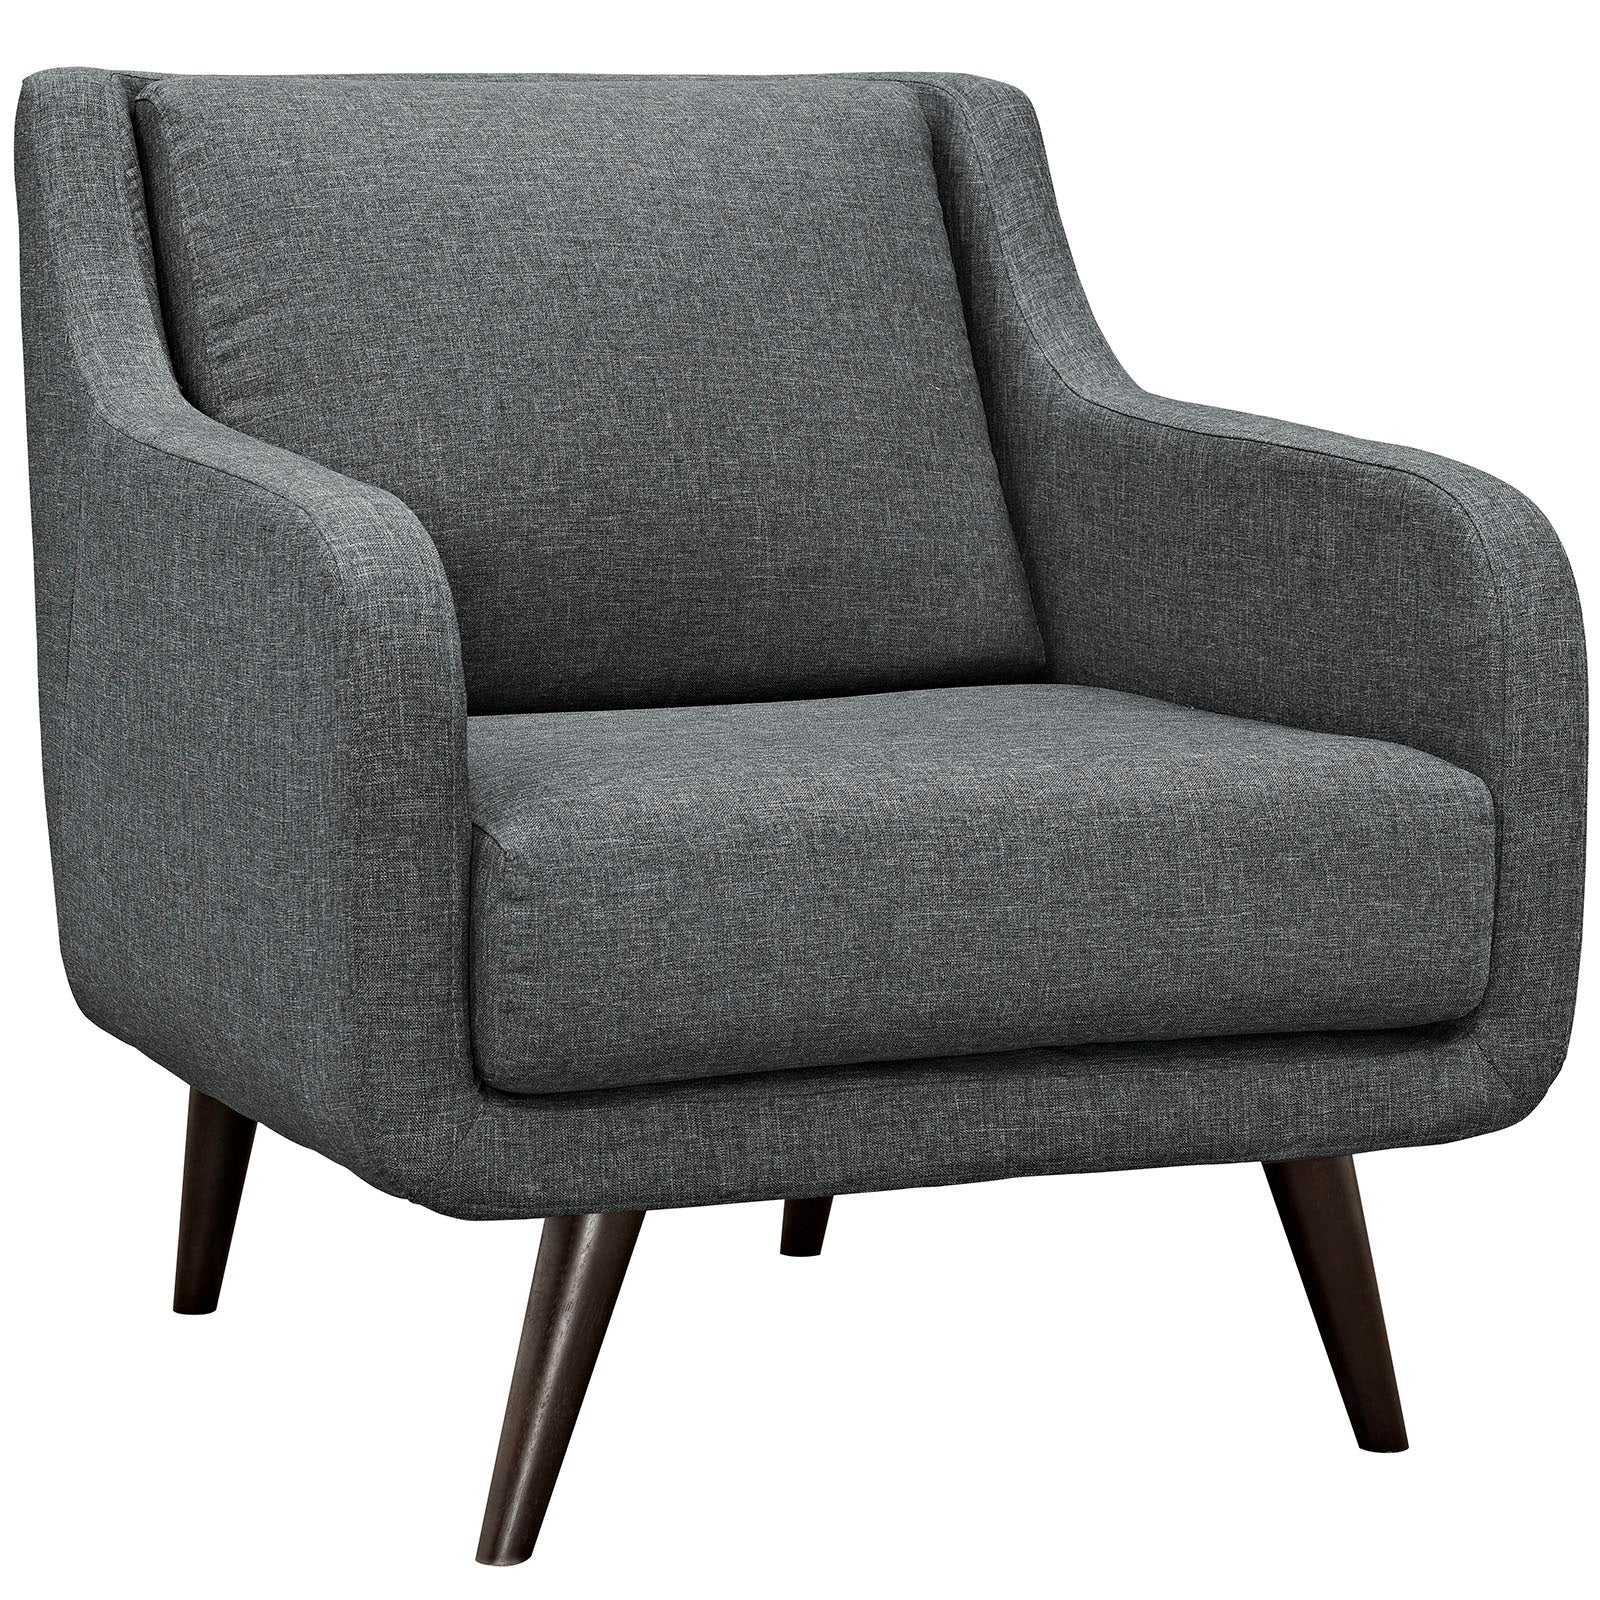 Modway Living Room Sets - Verve Armchairs Set Of 2 Gray